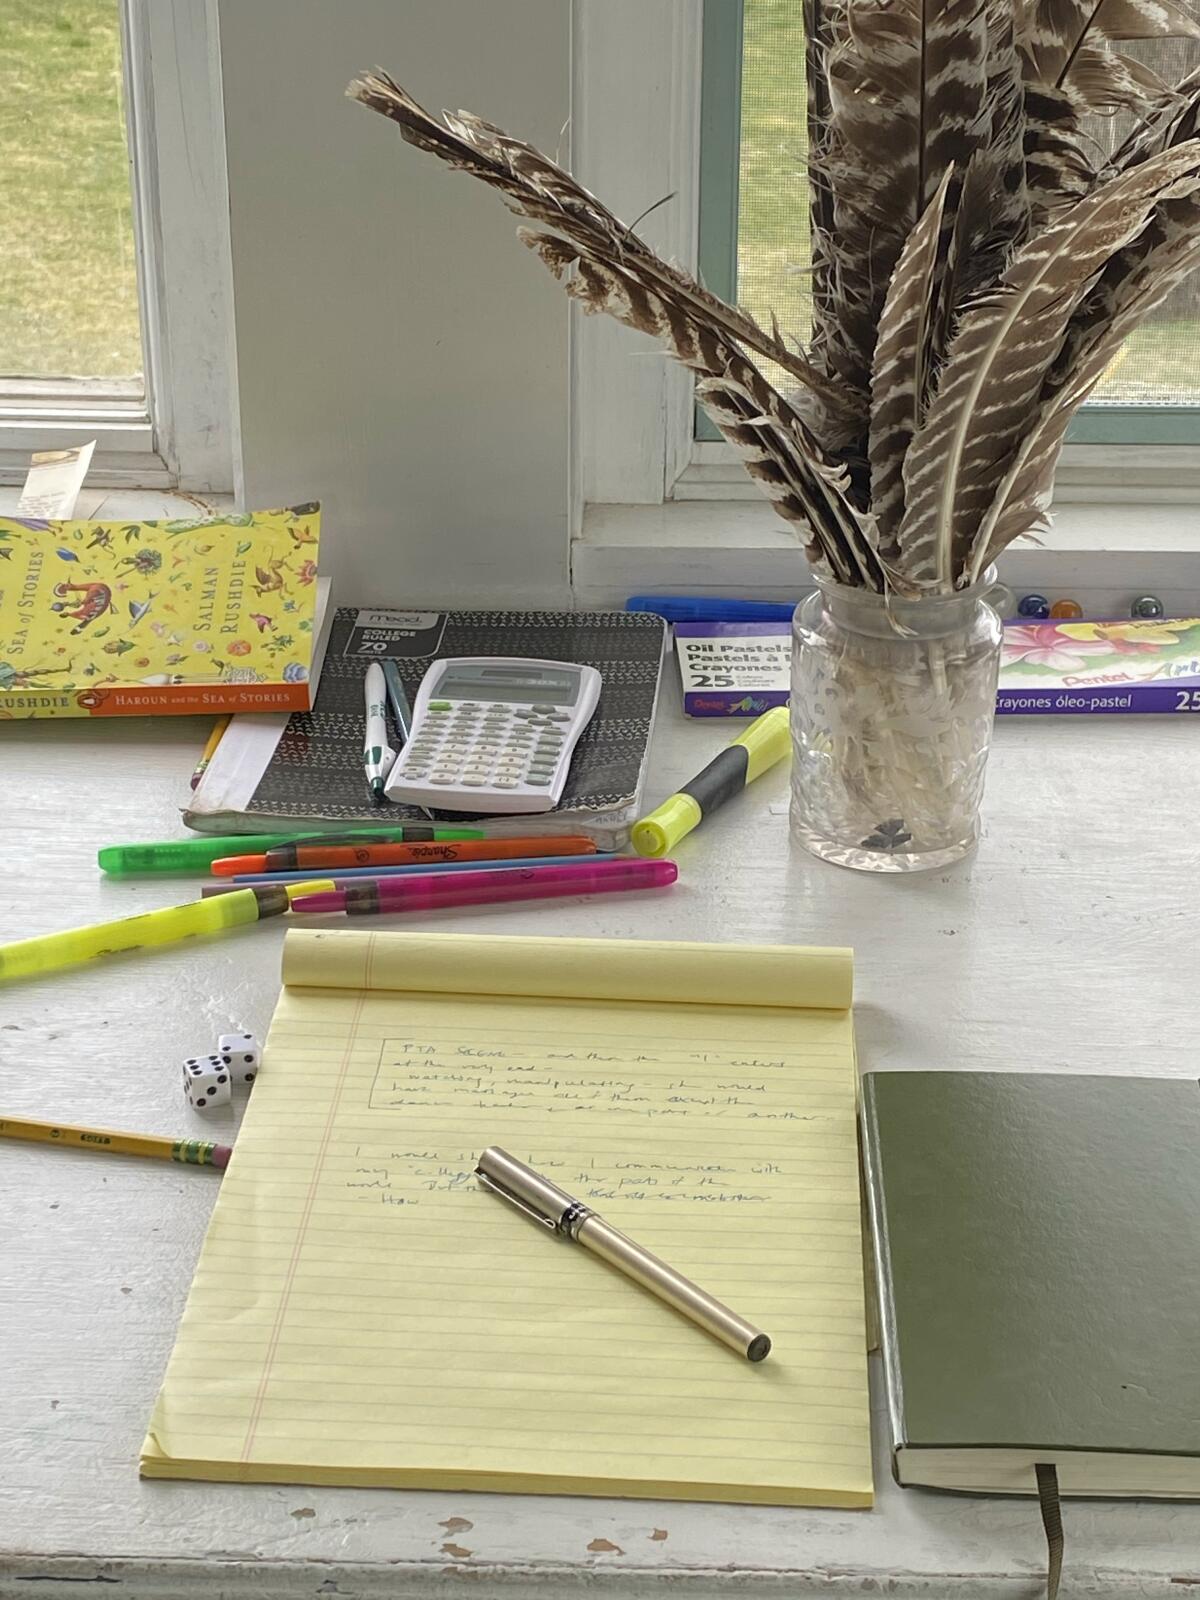 Anna Solomon's shared workspace, with turkey feathers.